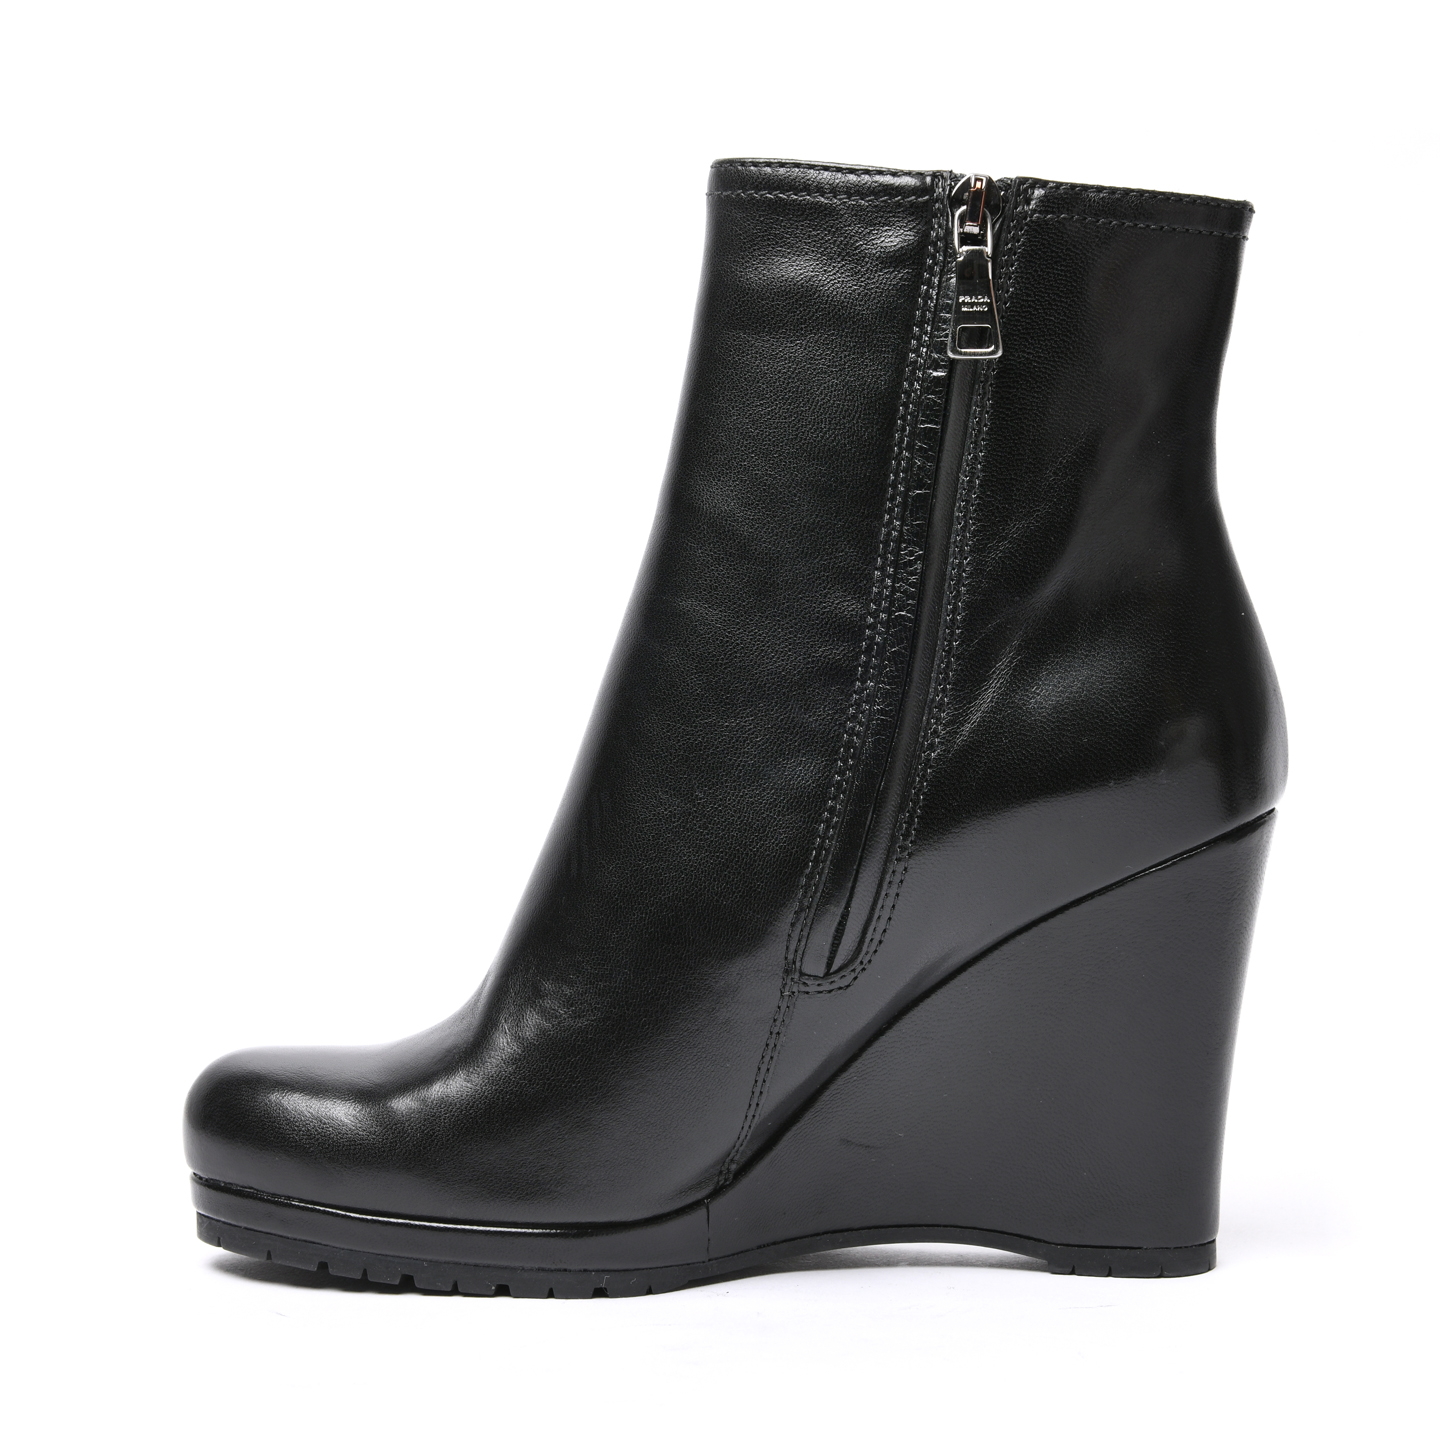 Prada Calzature Donna Ankle Wedge Boots, Size 36.5 - LabelCentric